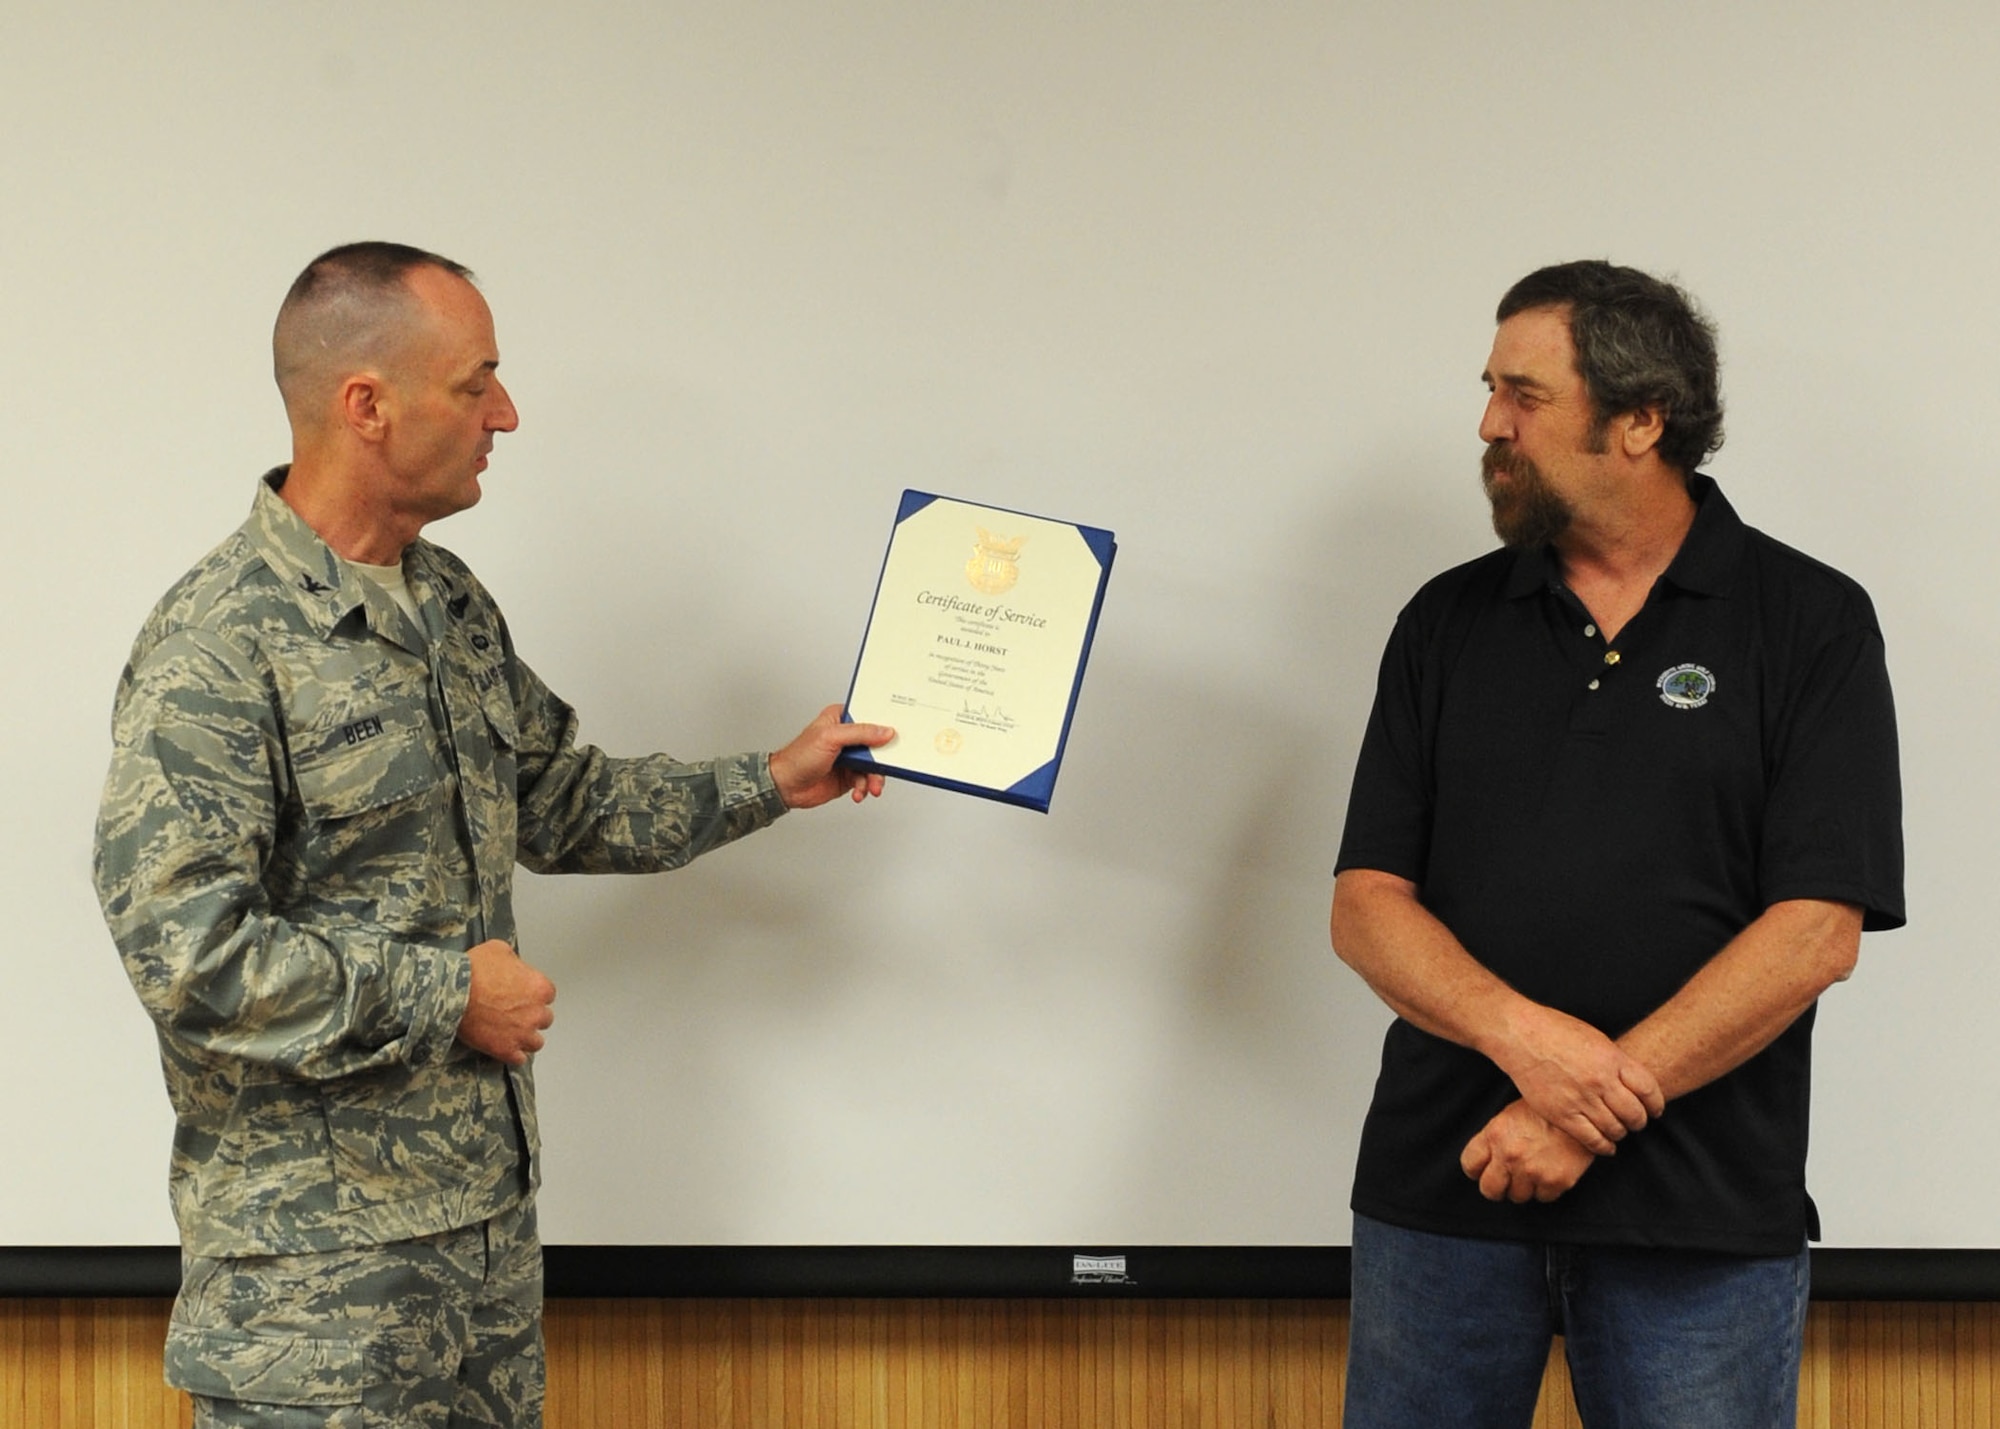 Paul Horst, 7th Force Support Squadron, is recognized for 30 years of government service by Col. David Béen, 7th Bomb Wing commander April 12, 2012, at Dyess Air Force Base, Texas. Horst began his military career in 1978 as security forces for the Air Force and currently works at the Dyess golf course. (U.S. Air Force photo by Airman 1st Class Peter Thompson/ Released)